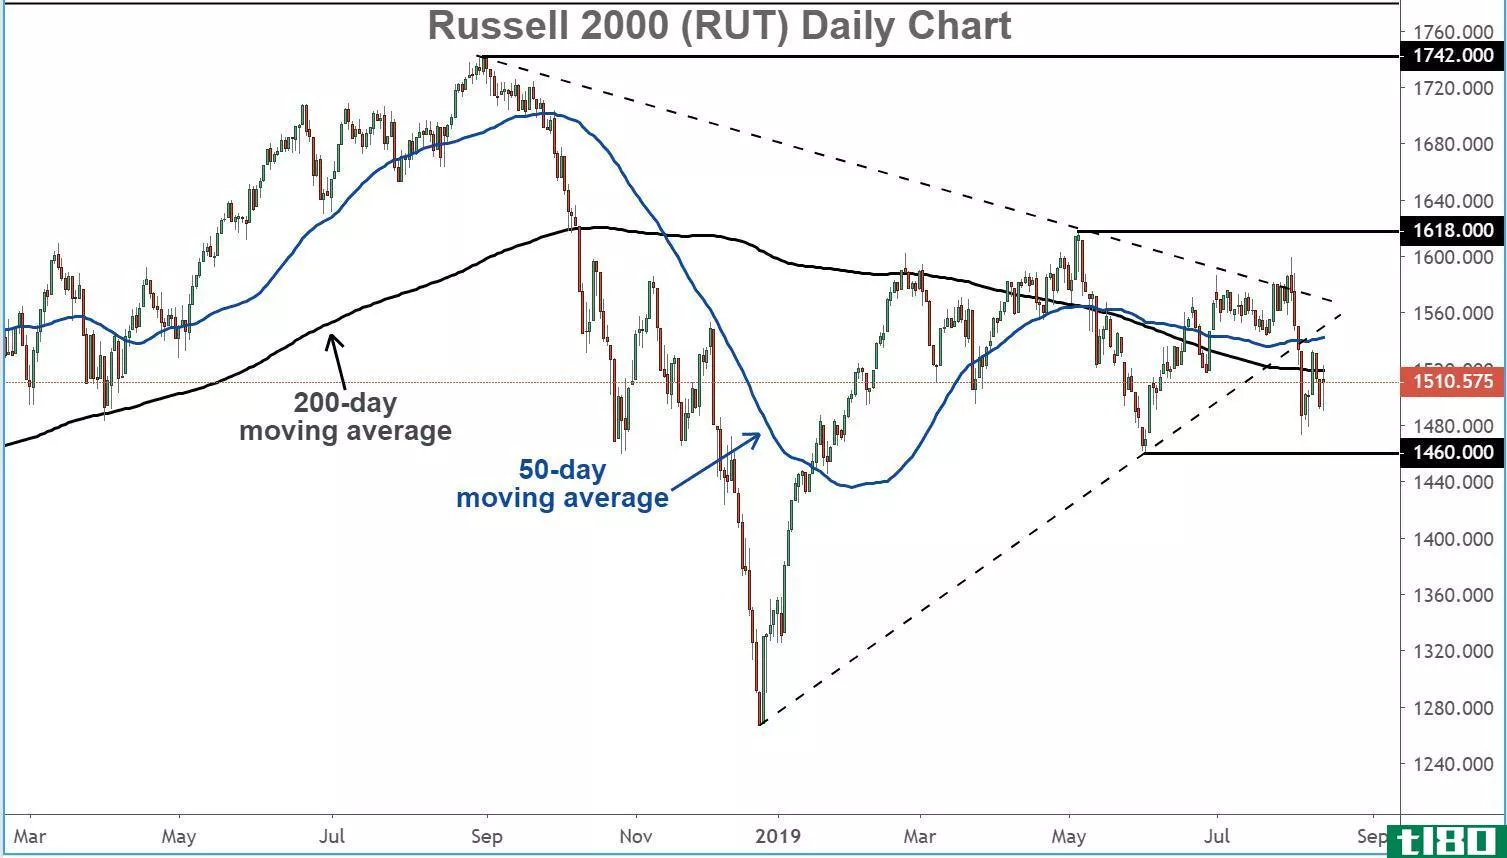 Chart showing the performance of the Russell 2000 Index (RUT)